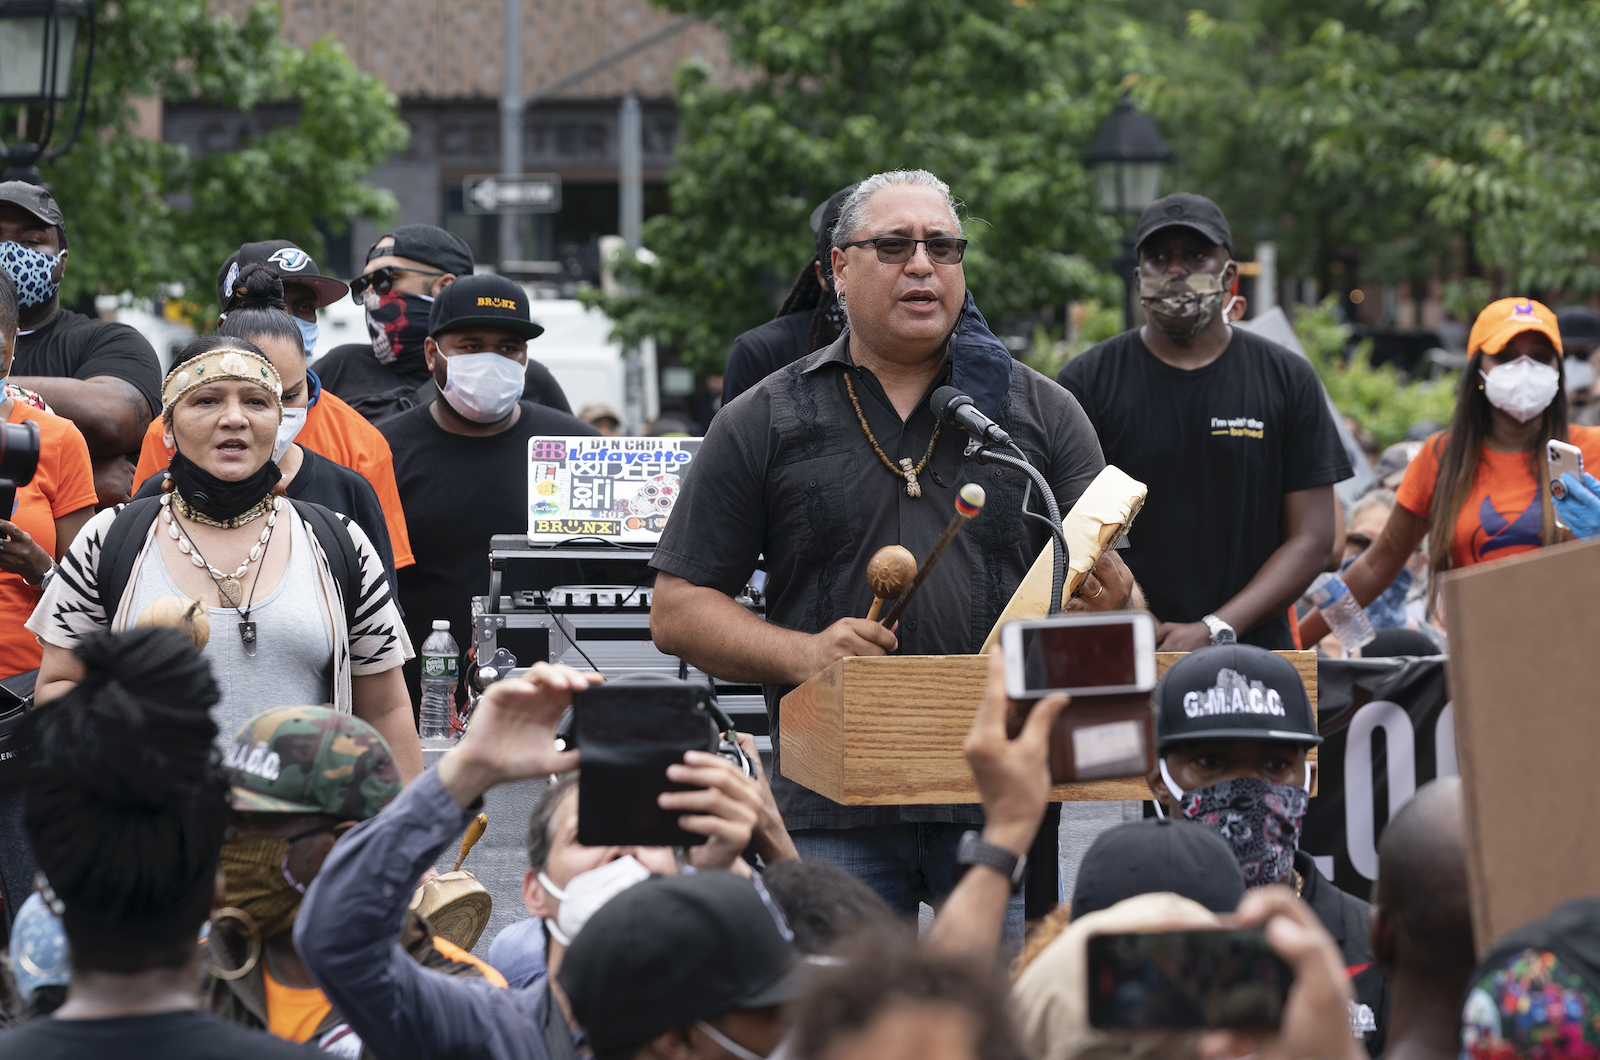 R. Mukaro Borrero speaks at a podium with a drum at a BLM protest